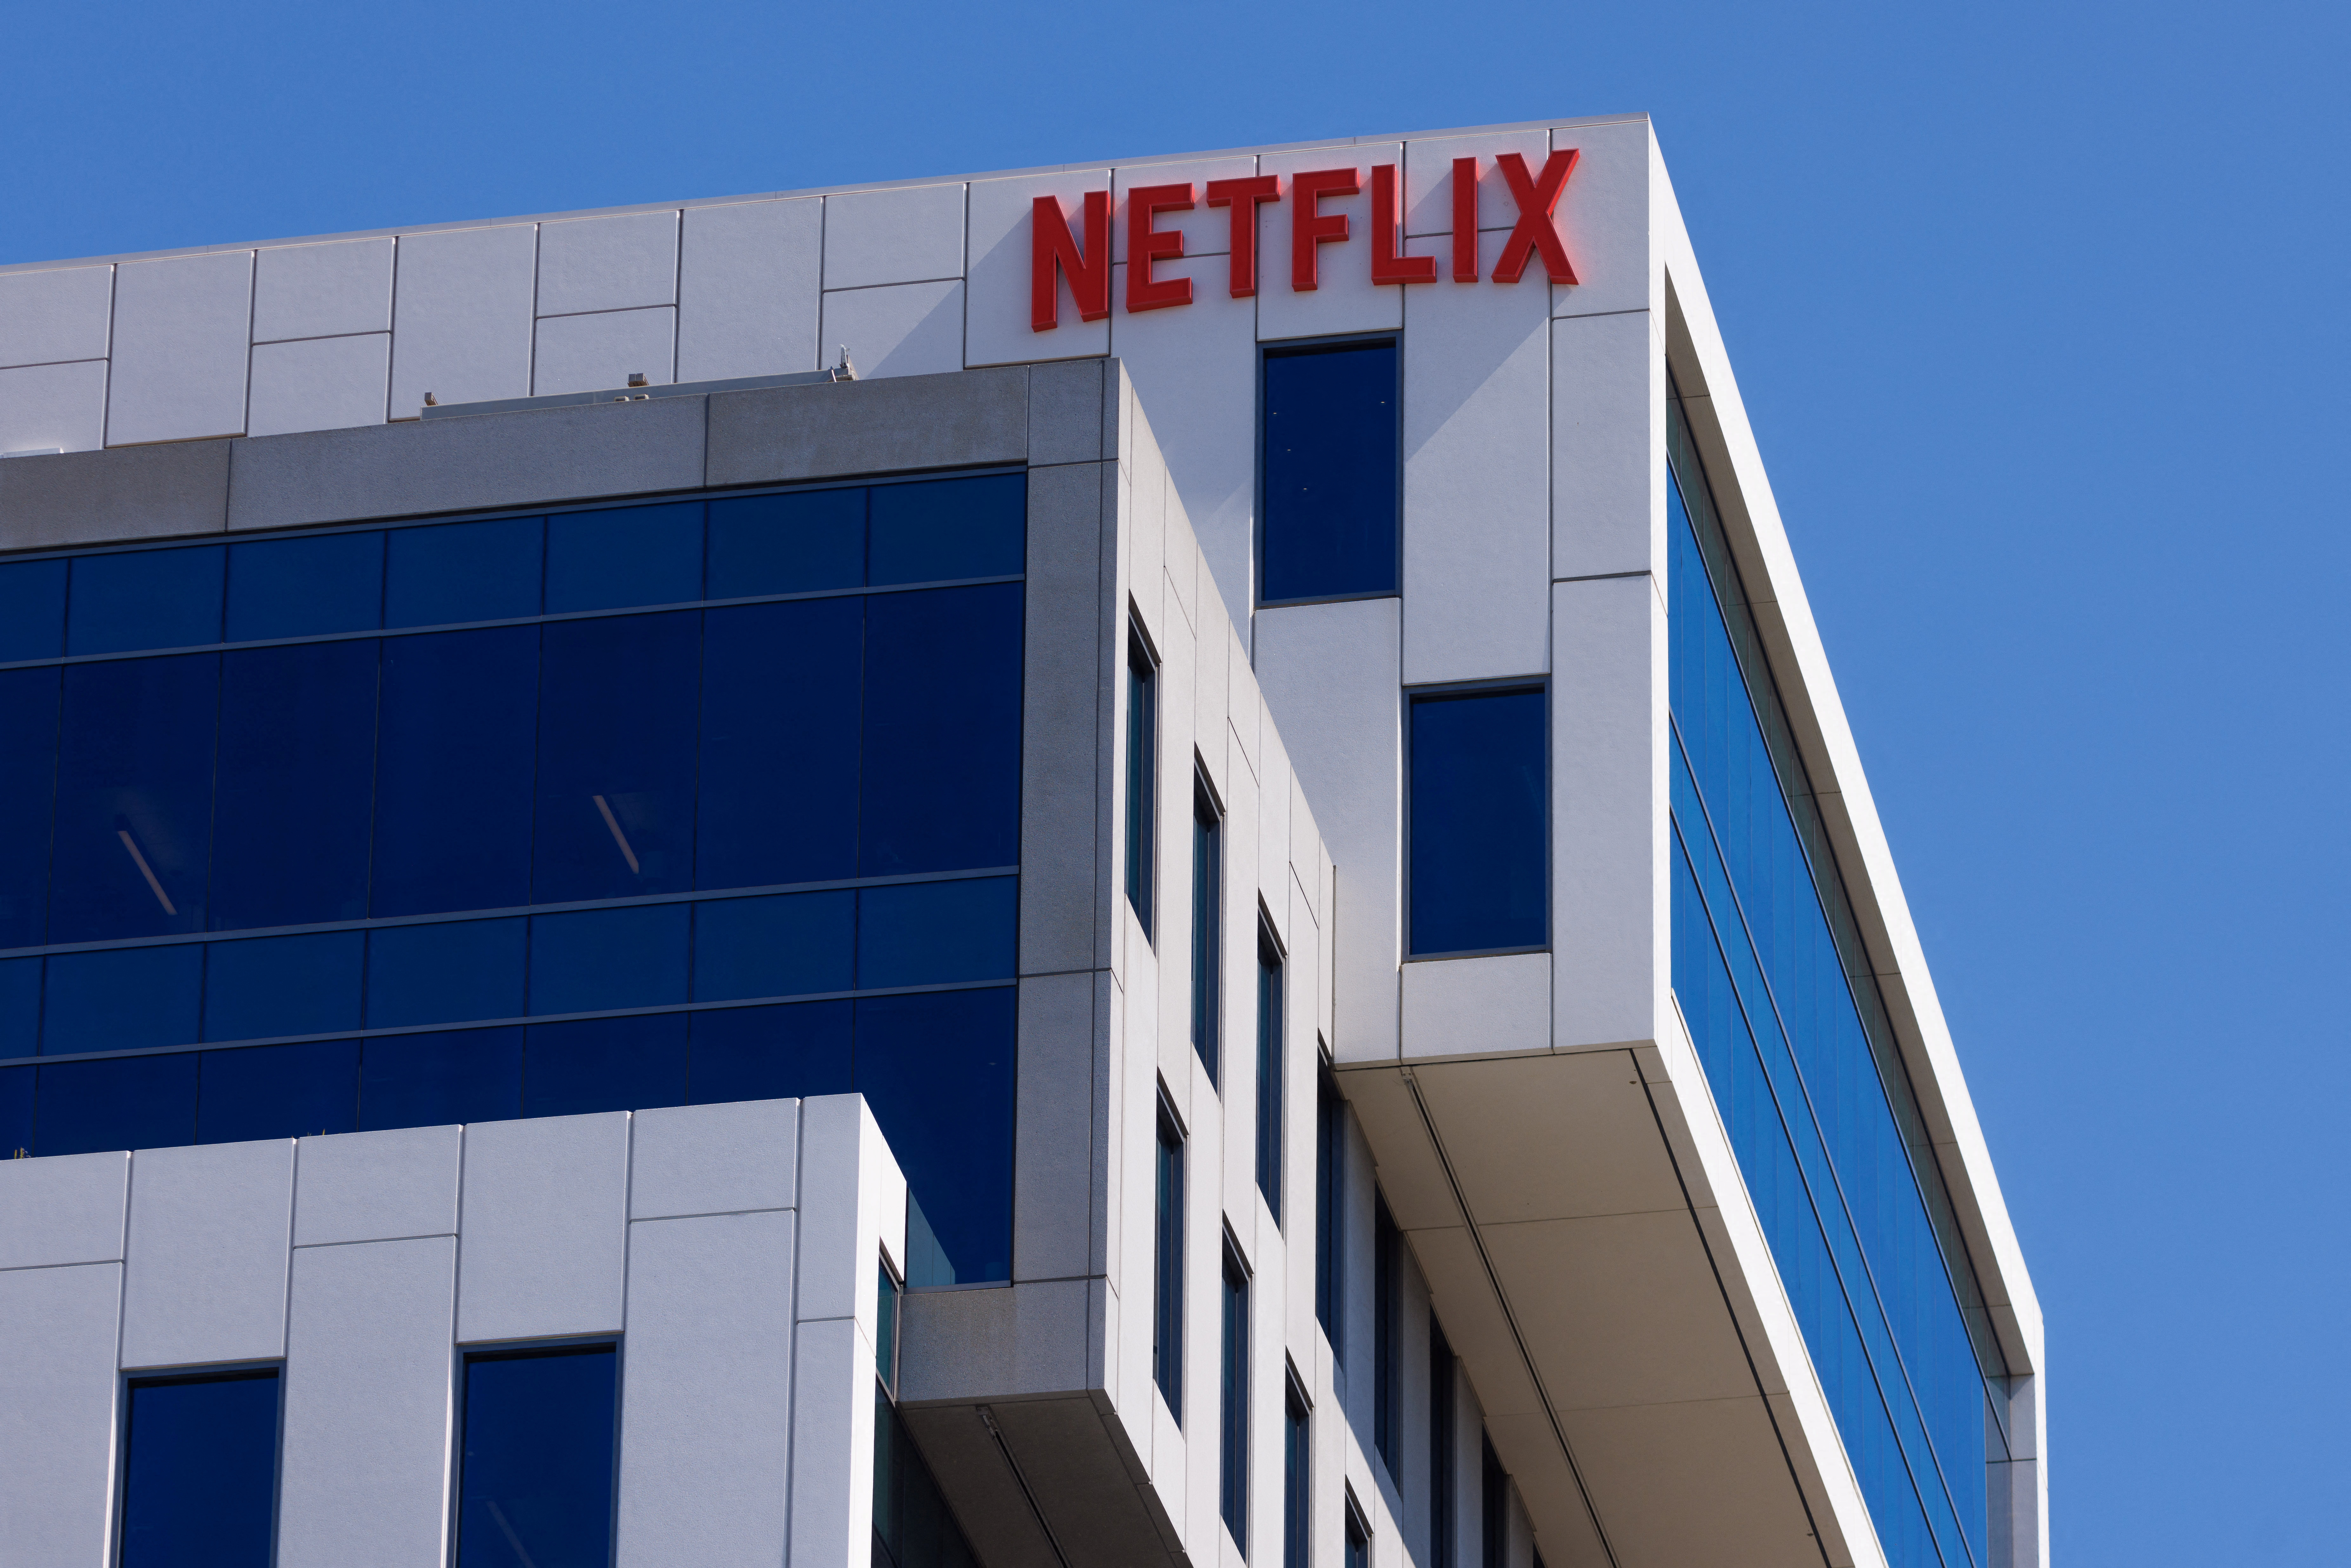 Netflix logo shown on building in Los Angeles